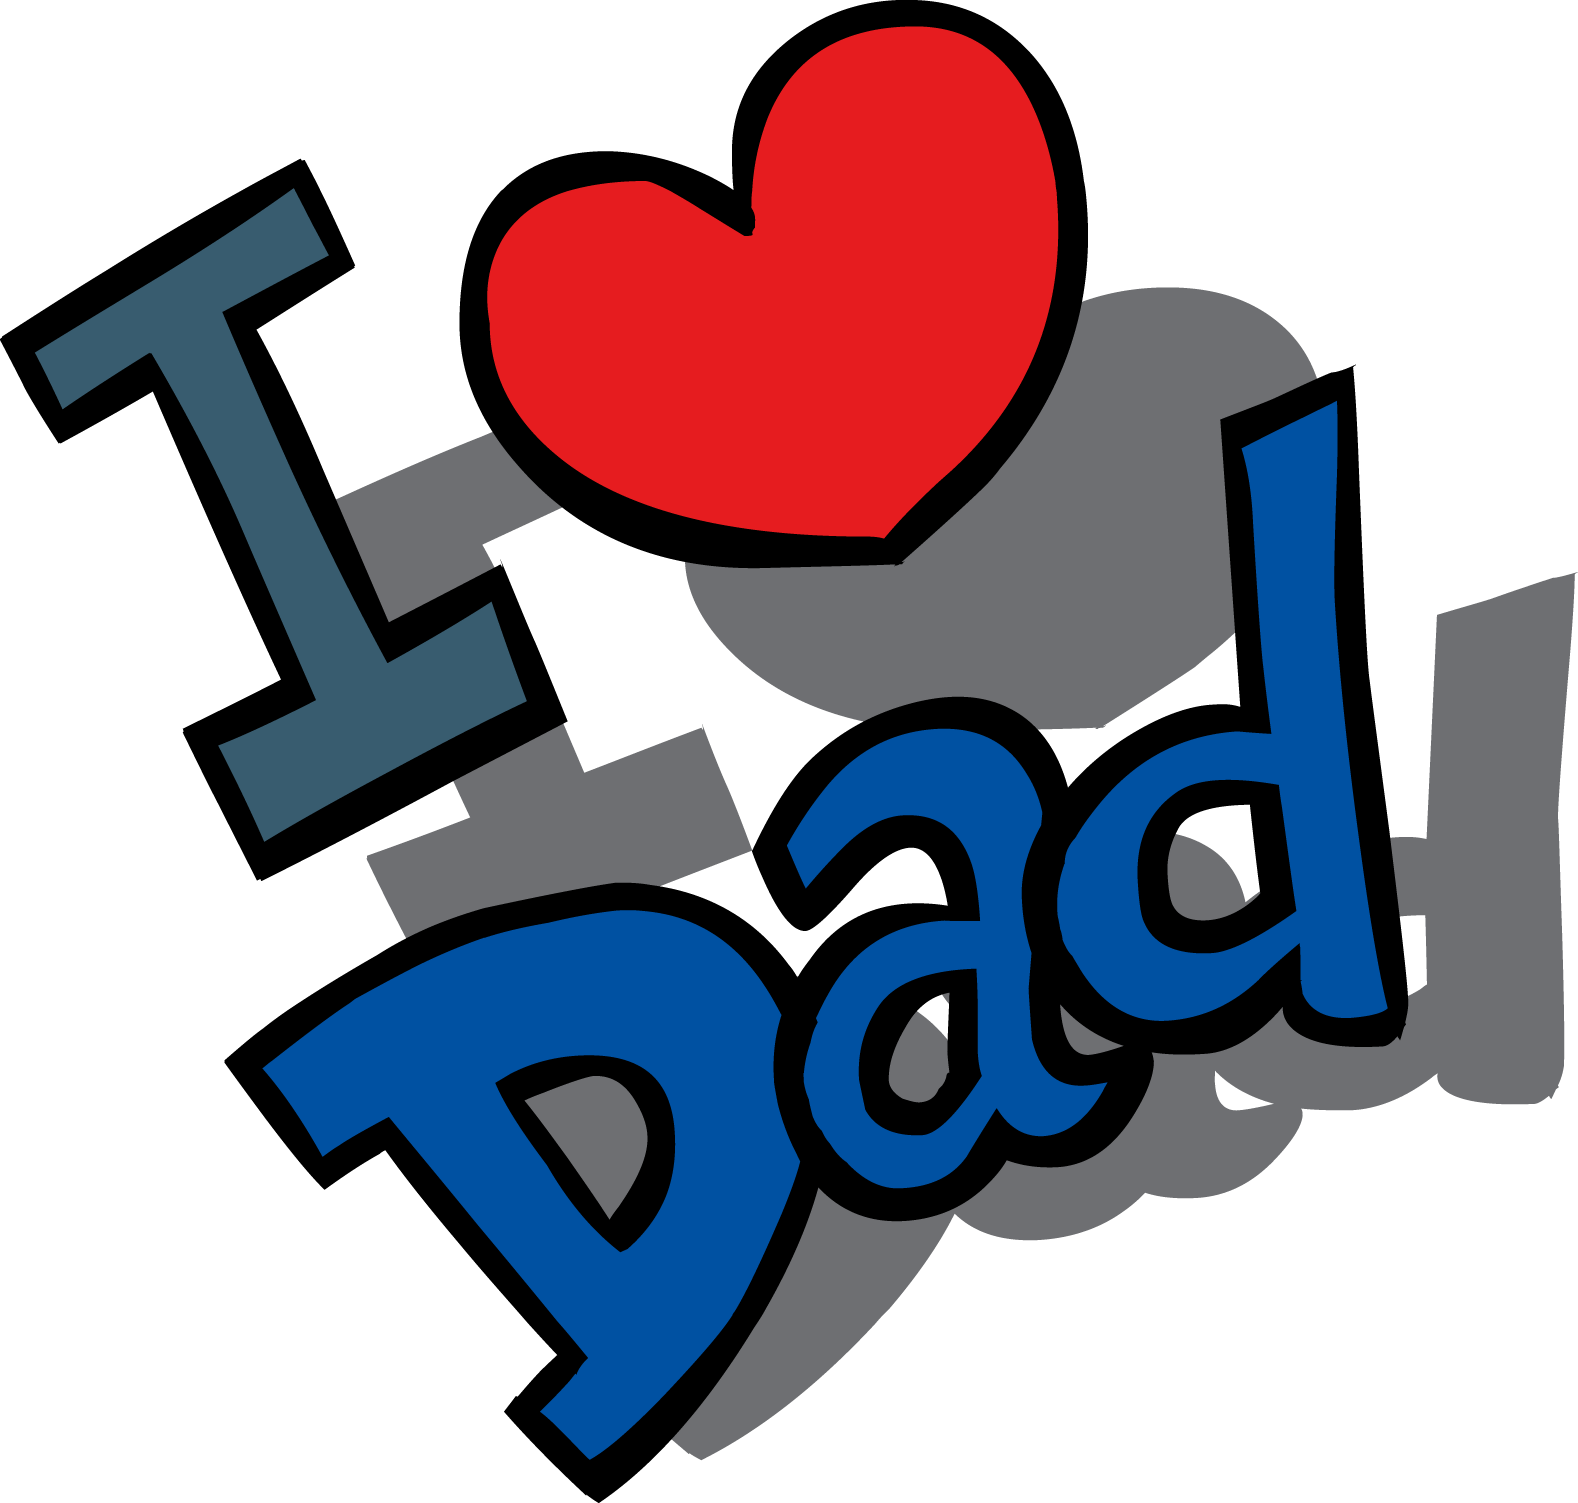 Download Fathers Day PNG File png #42532 - Free Icons and PNG ...